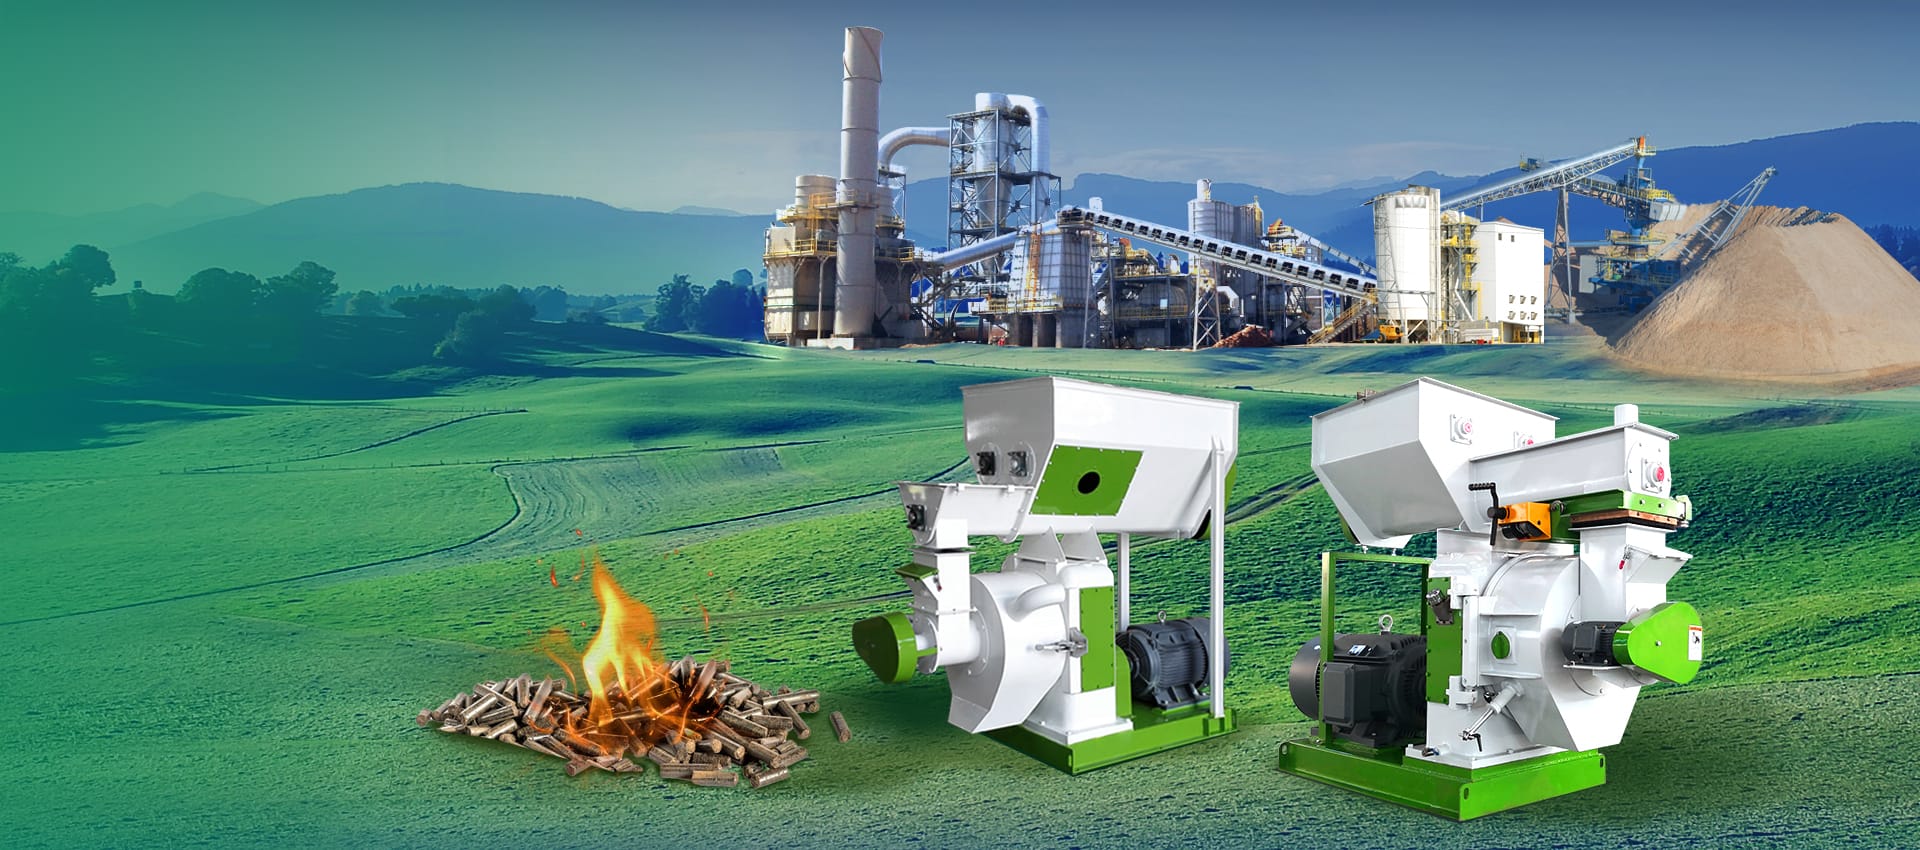 1-90tph wood pellet mill manufacturer in China